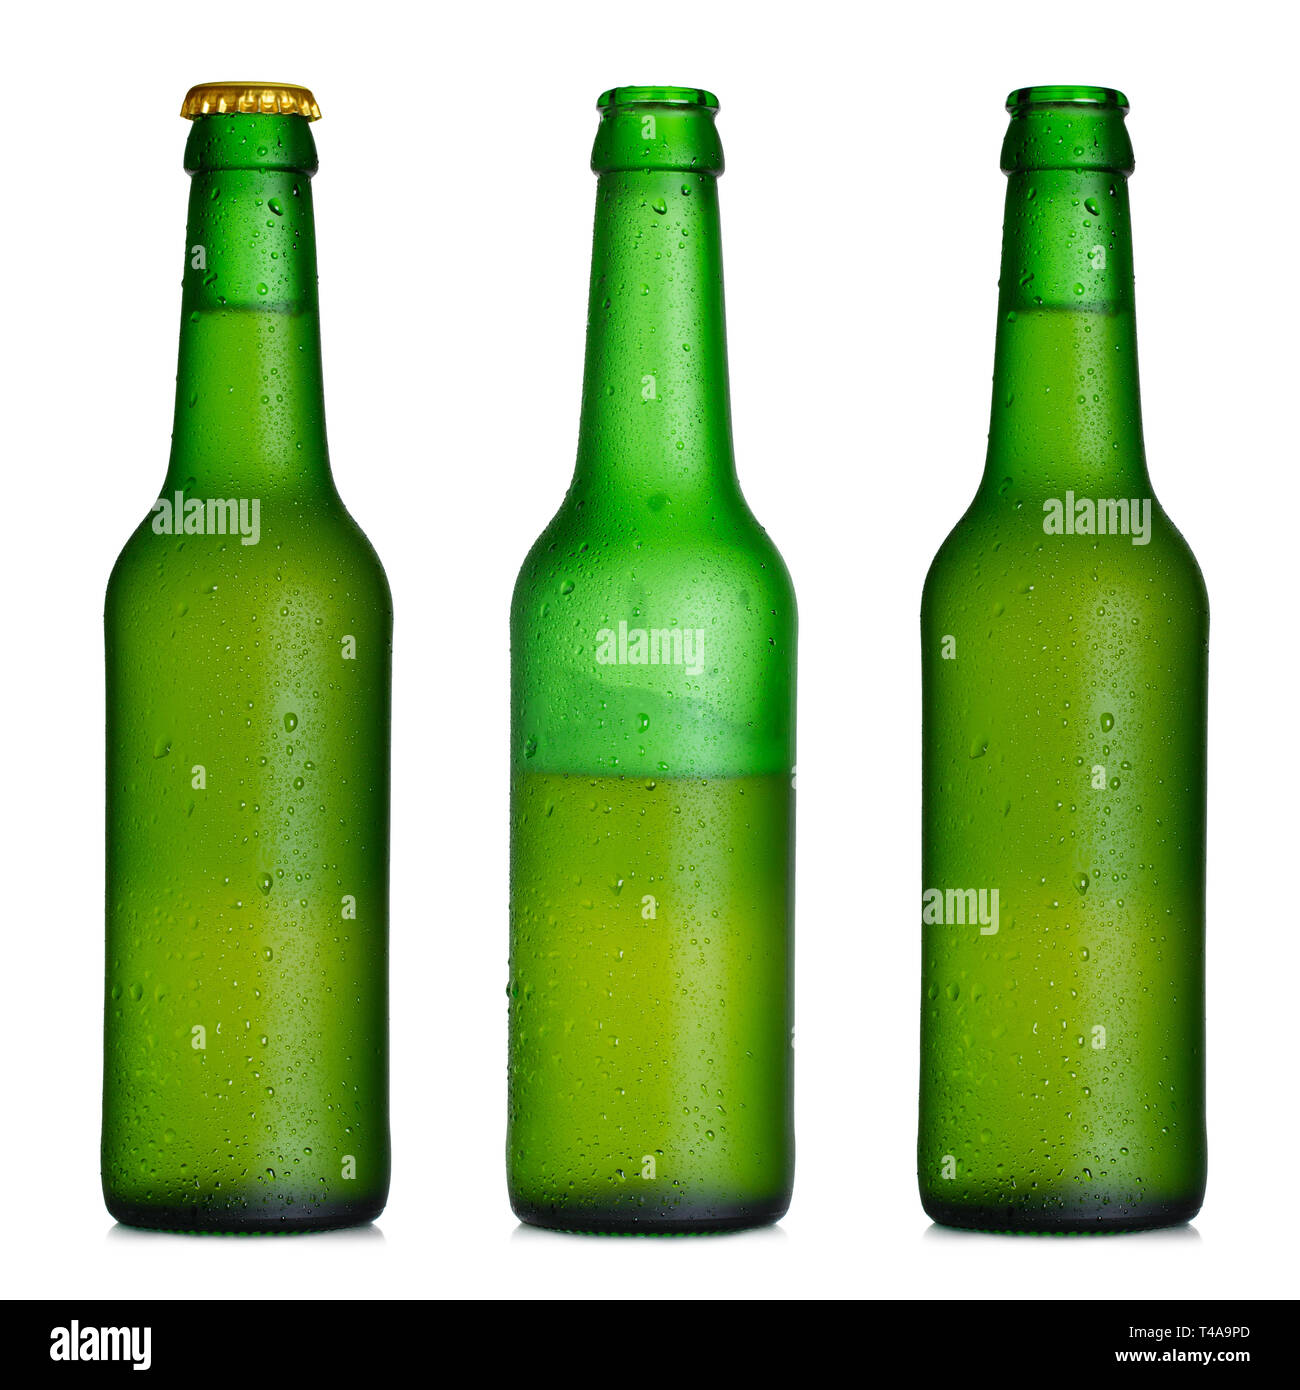 Beer bottle closed, half-full and opened Stock Photo